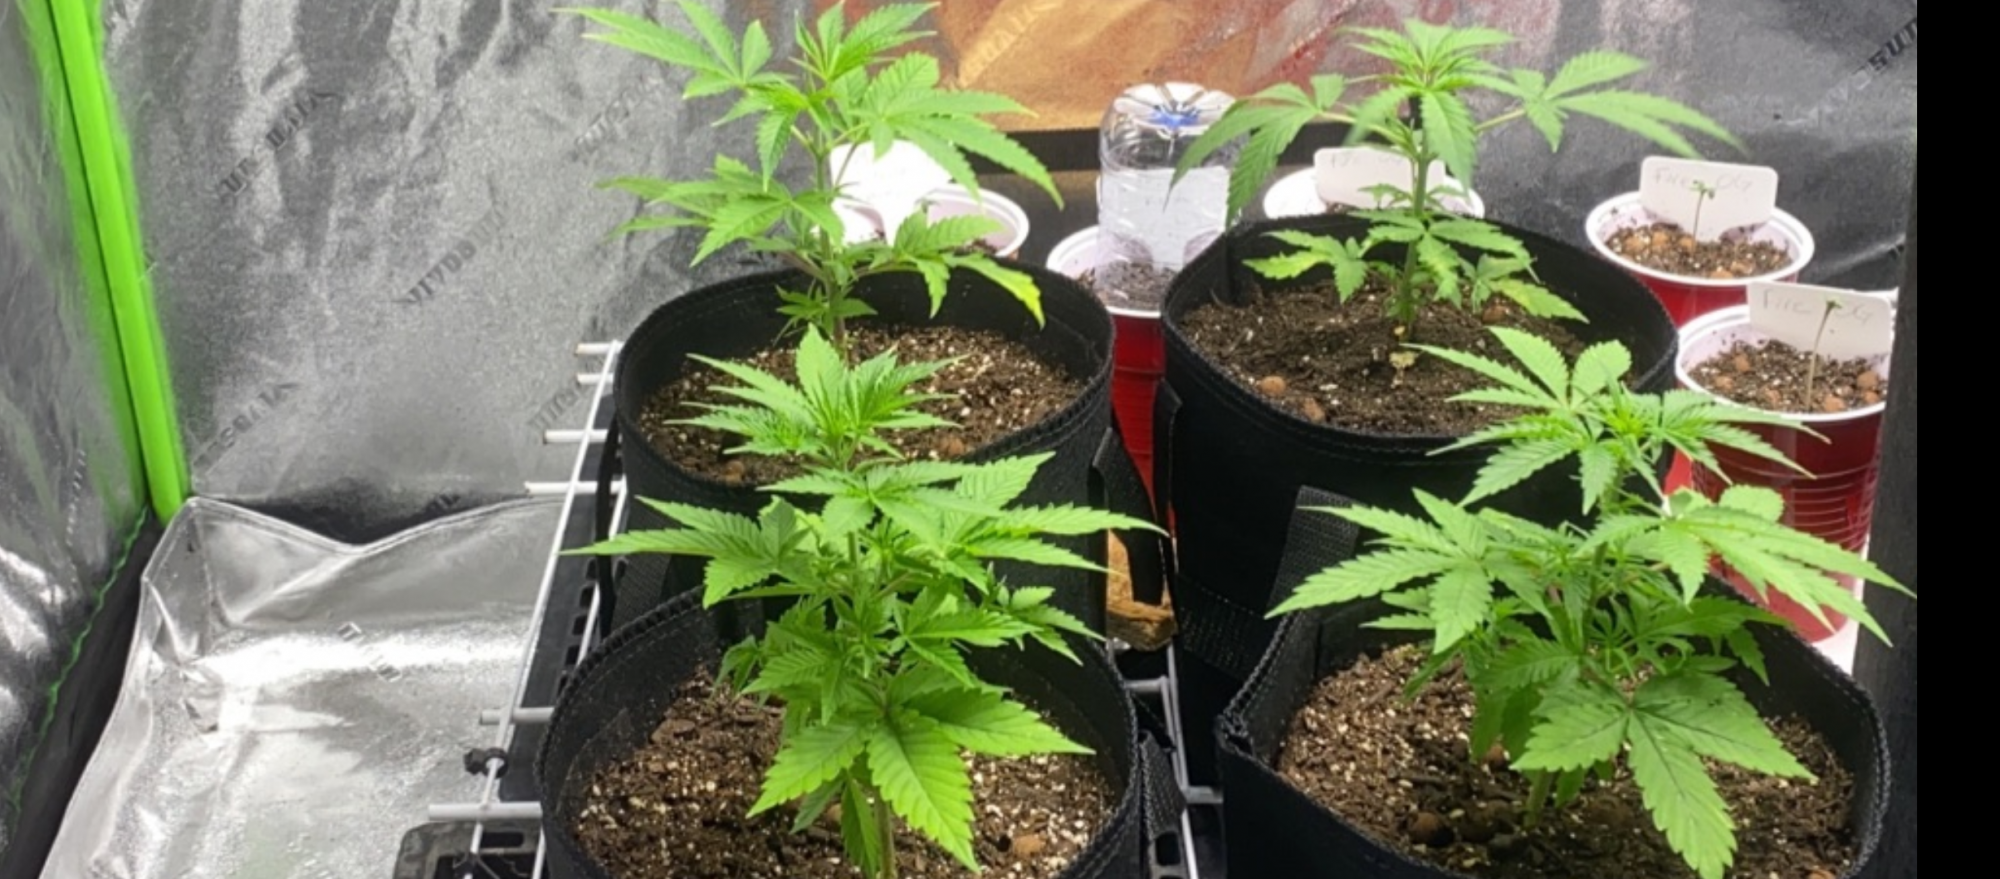 Update transplanted girls from over watered 4